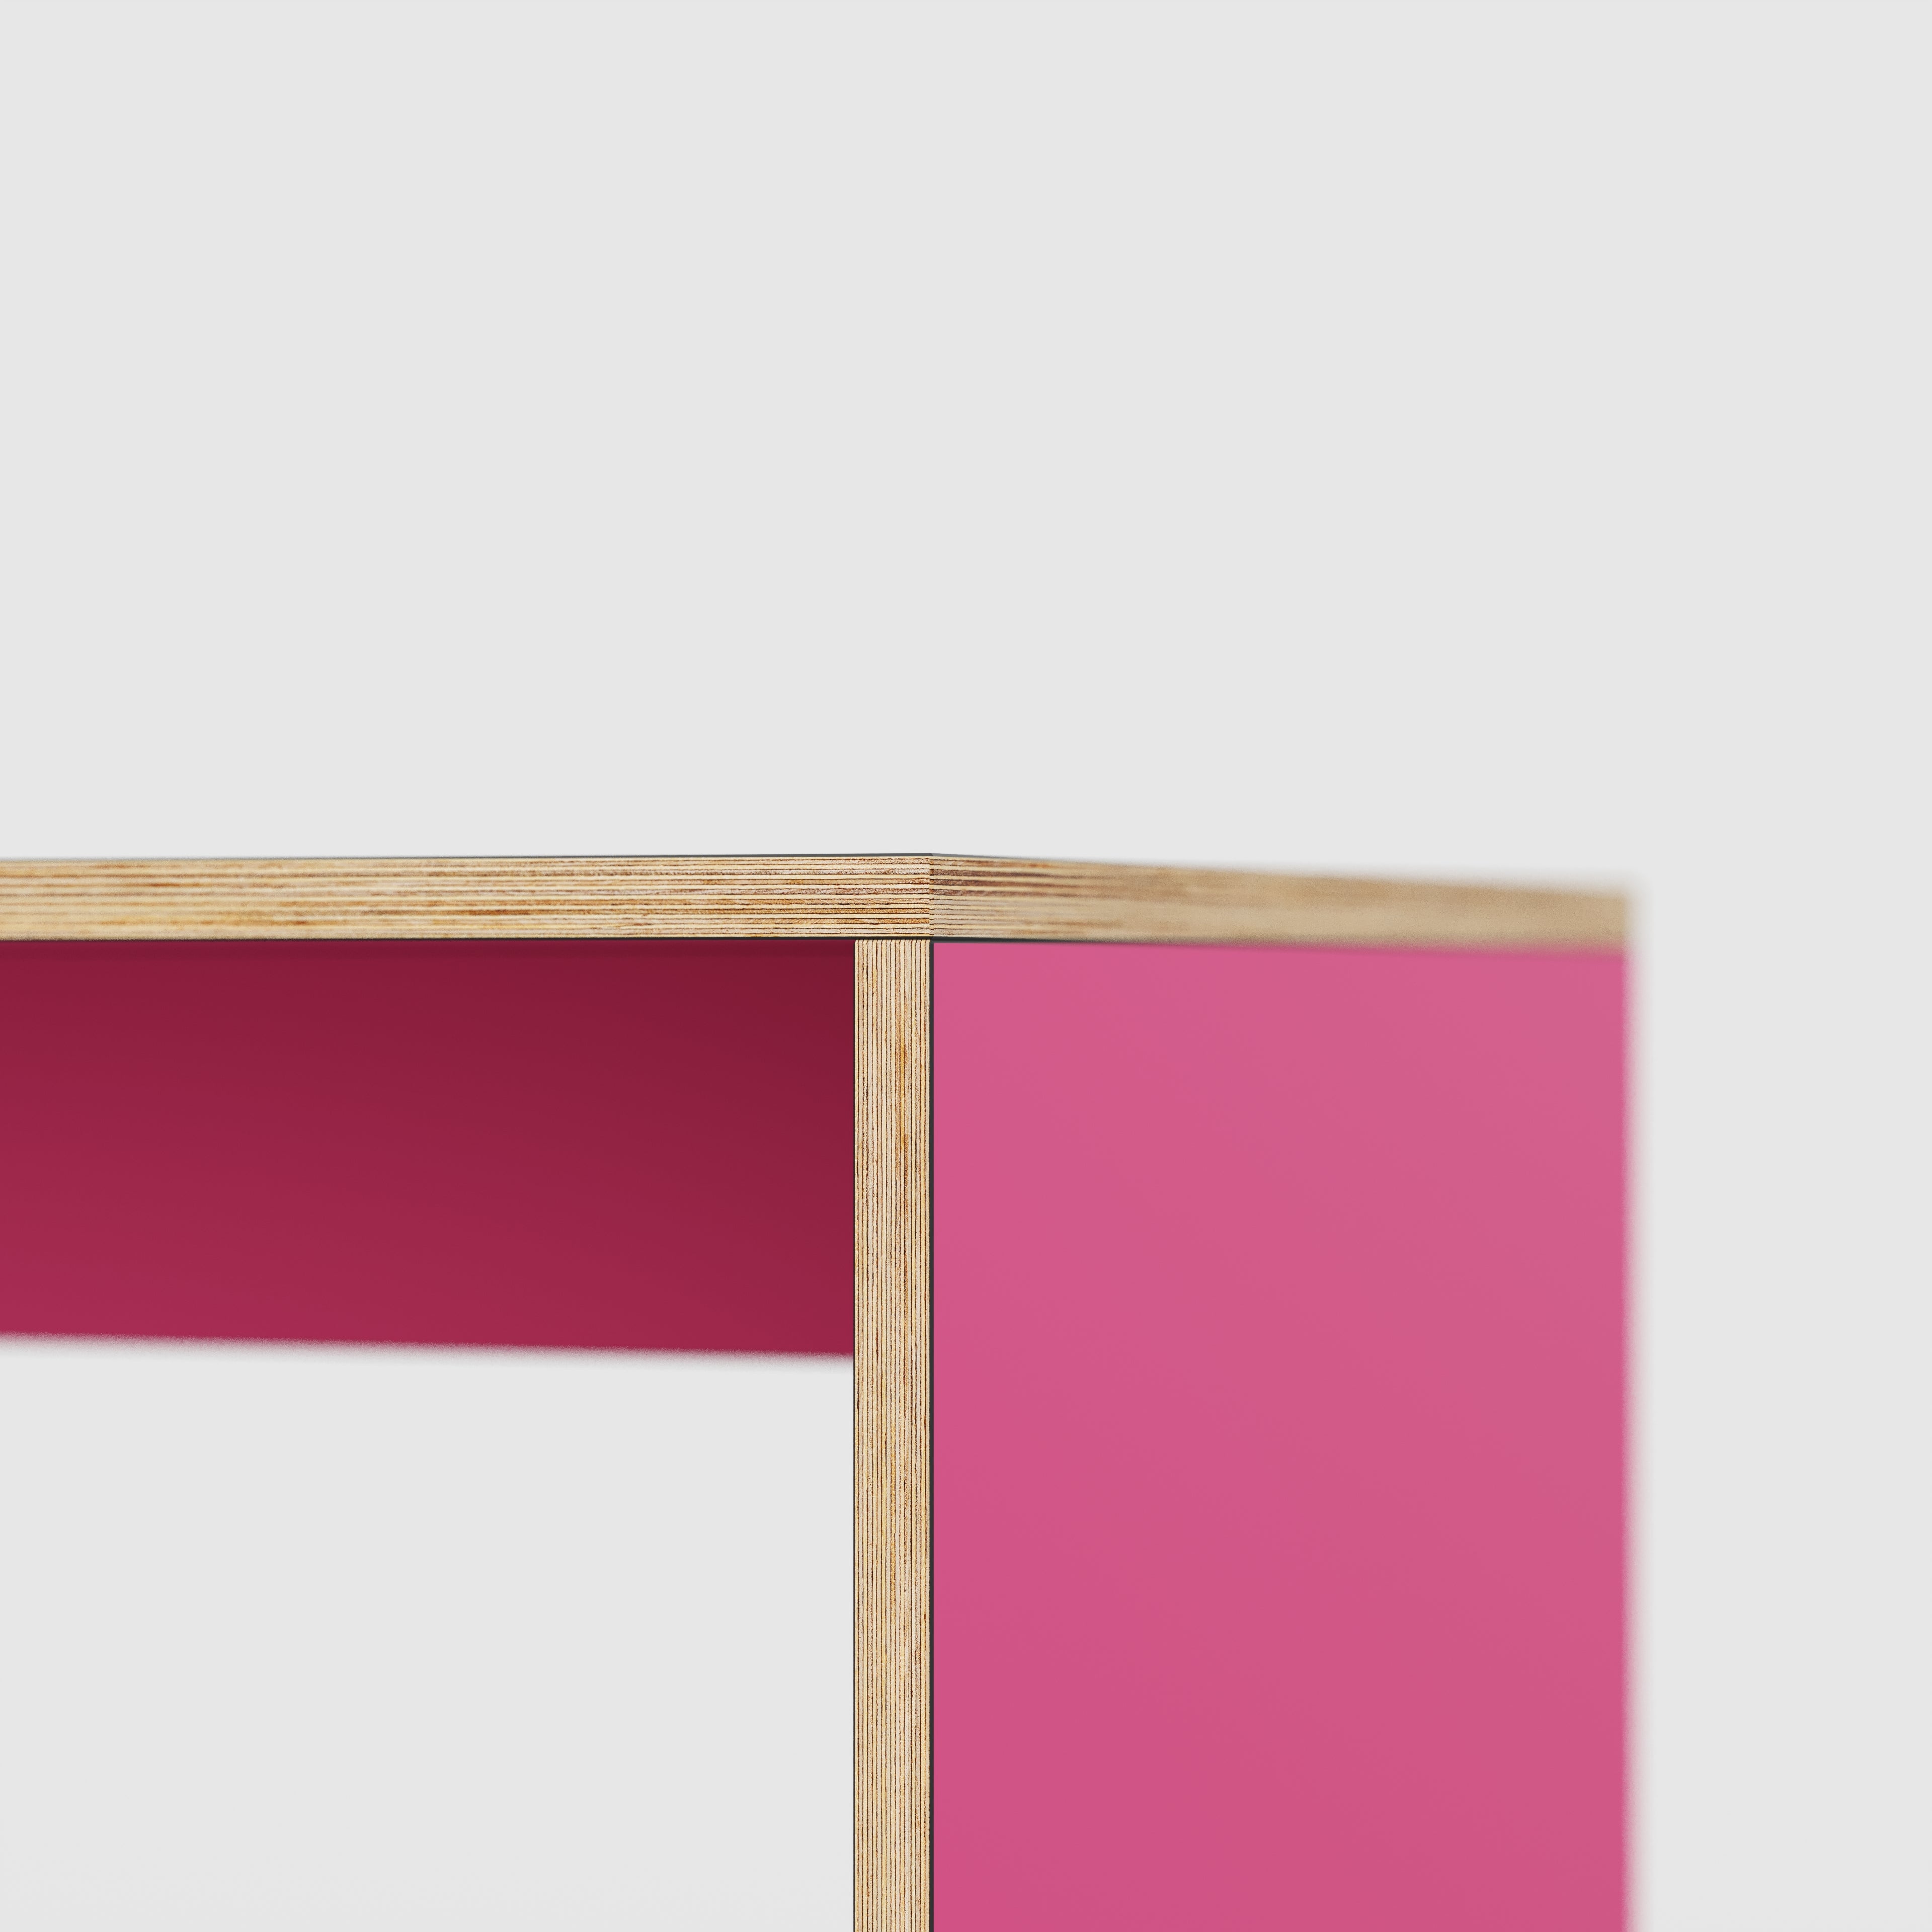 Coffee Table with Solid Sides - Formica Juicy Pink - 800(w) x 800(d) x 450(h)